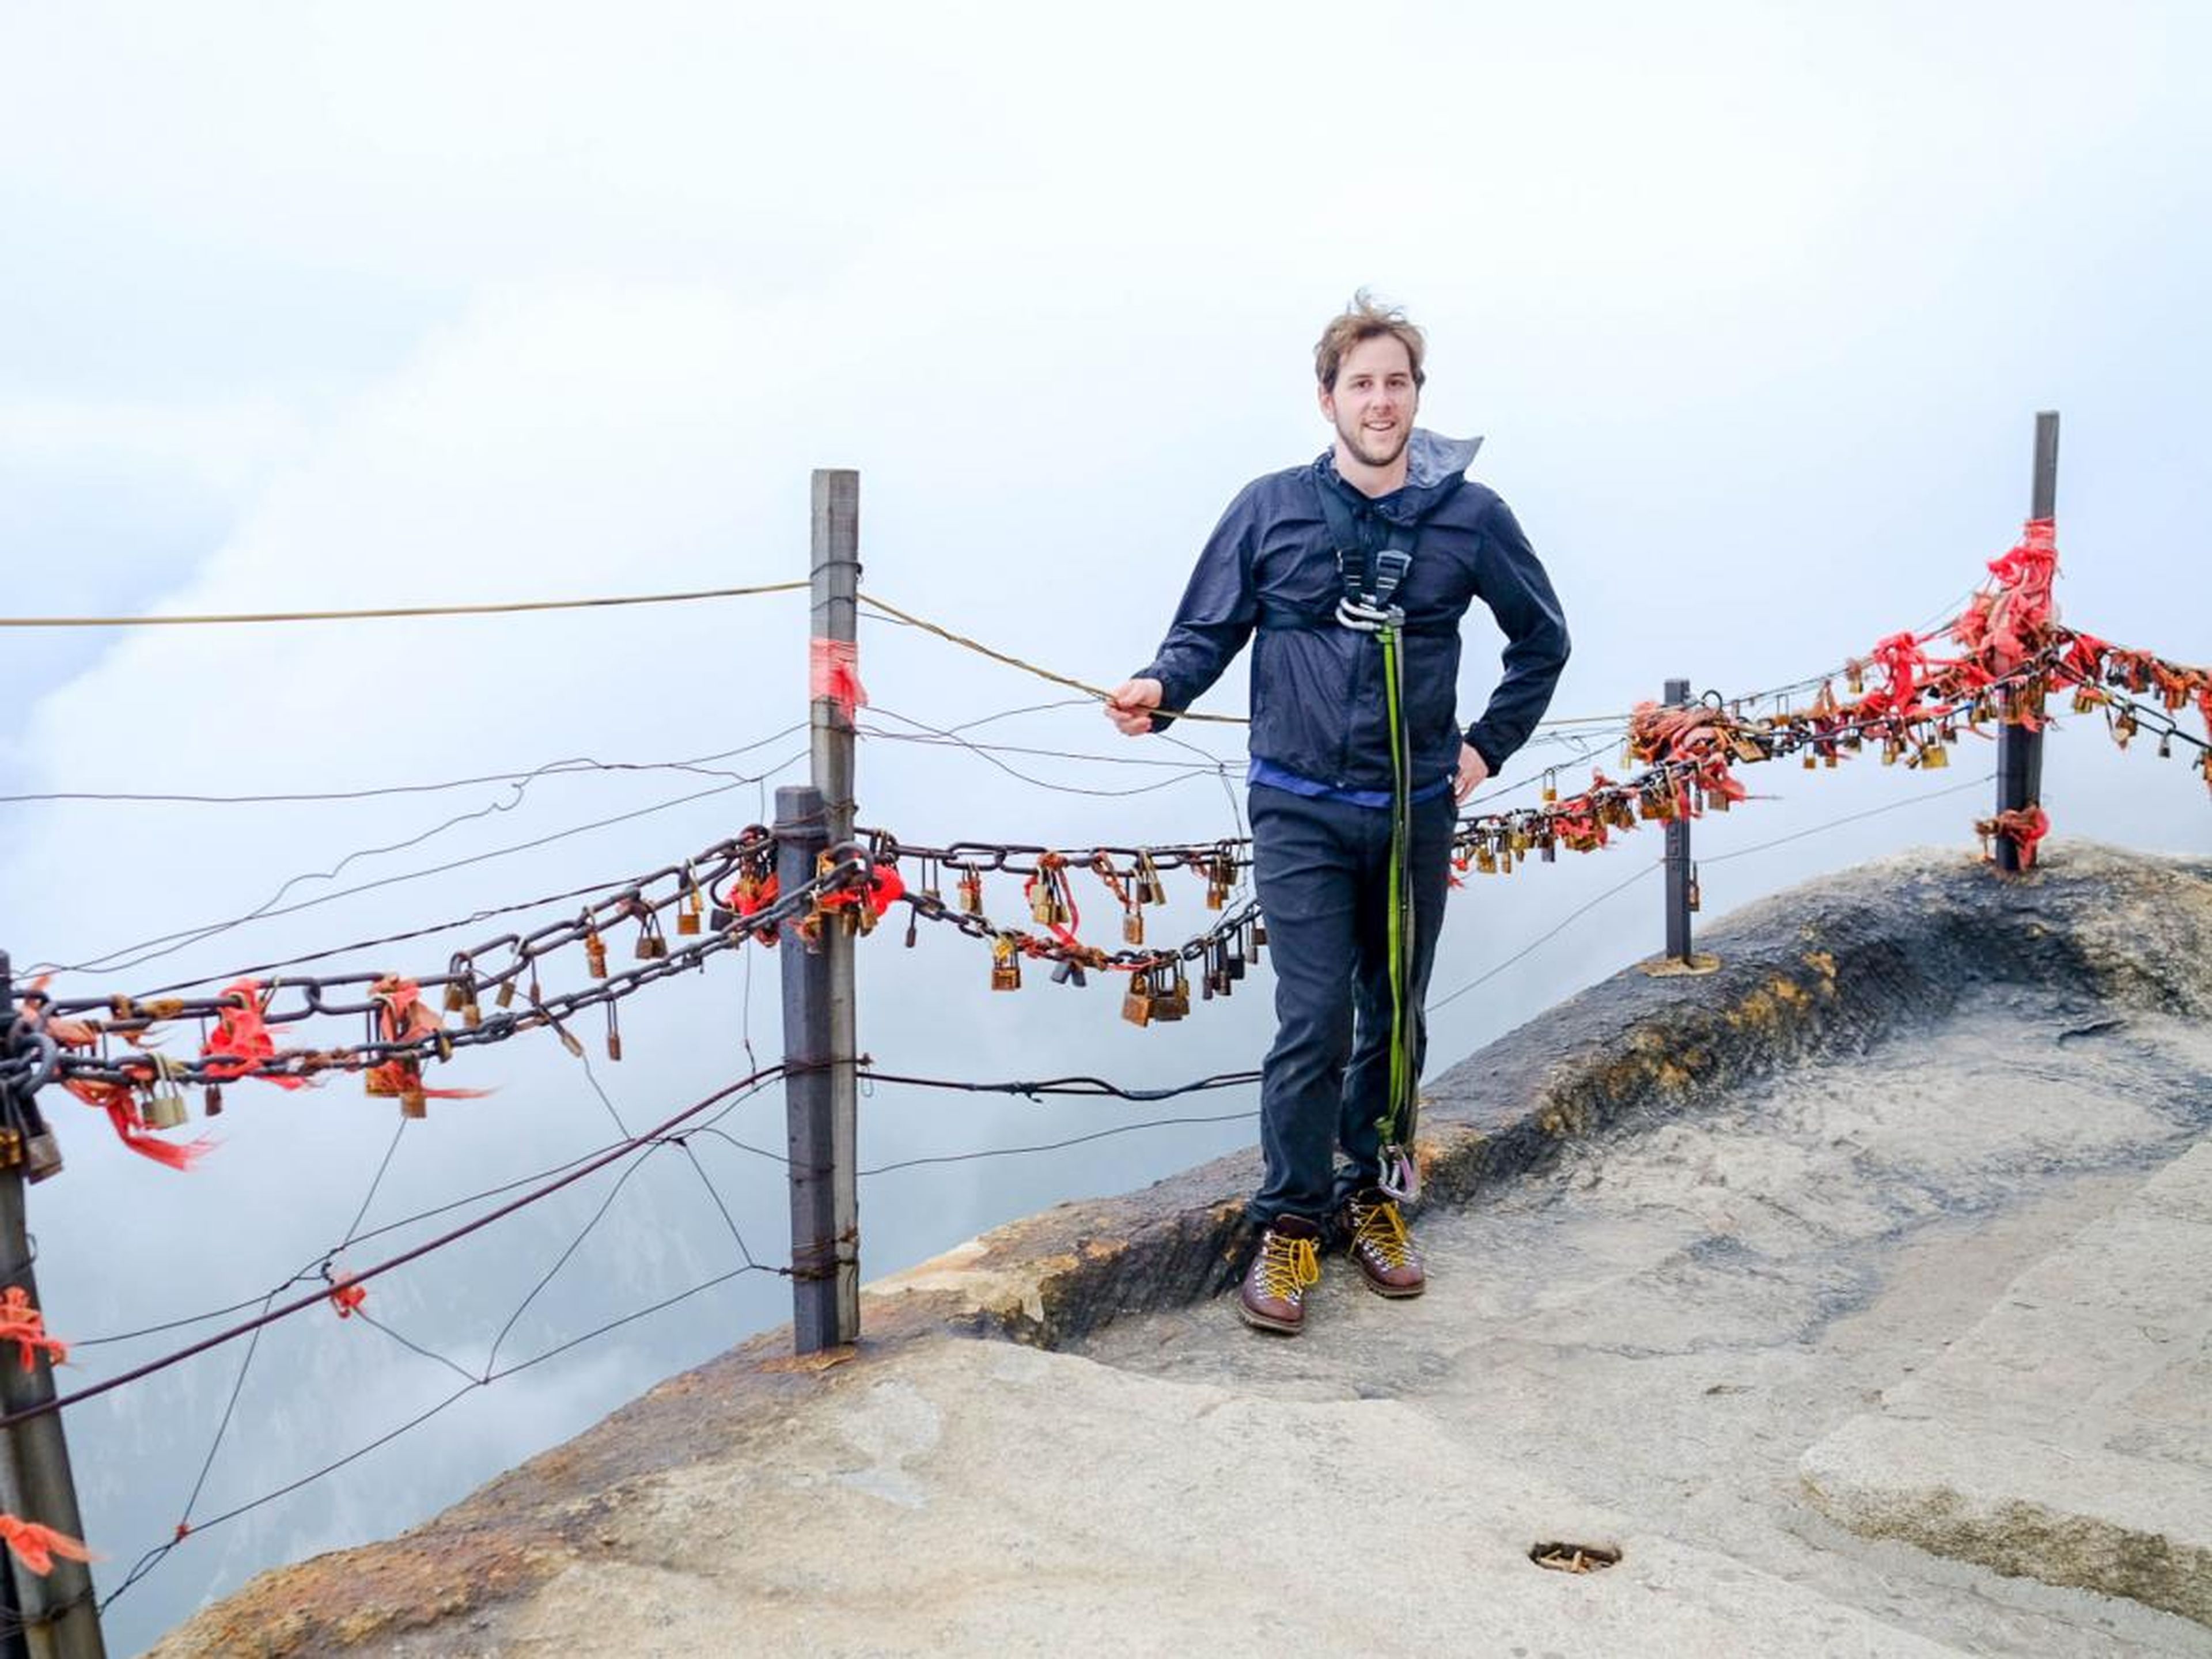 The author, approaching the Plank Walk on China's Mount Hua, which is considered by many to be one of the most dangerous hikes in the world.